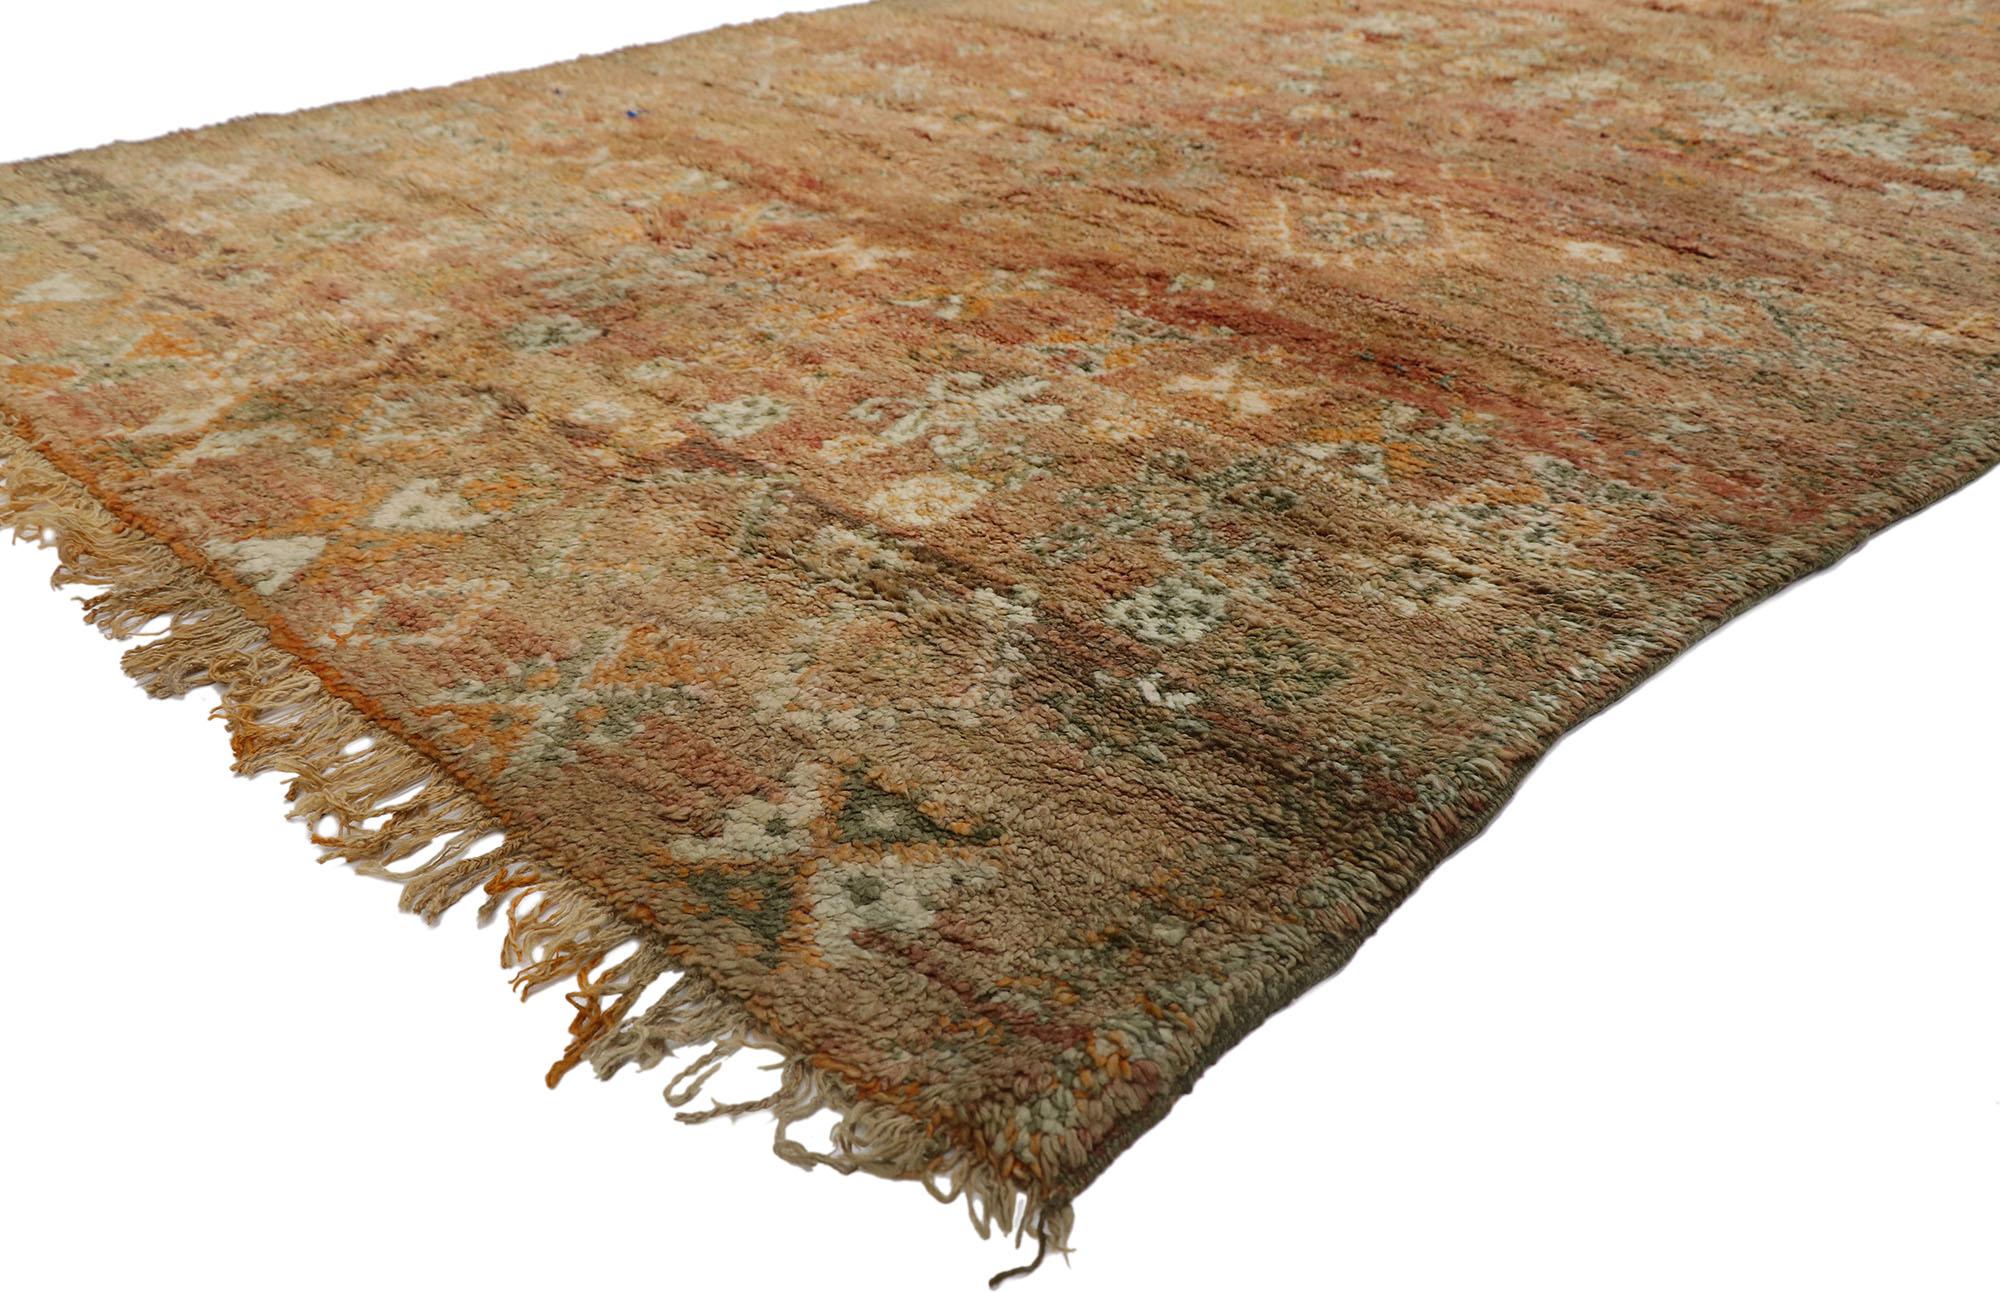 21253 Vintage Berber Moroccan Rug, 06'08 x 09'11.
Wabi-Sabi meets rustic boho in this hand-knotted wool vintage Moroccan rug. The distinctive tribal elements and warm earth-tone colors woven into this piece work together to bring forth a sense of